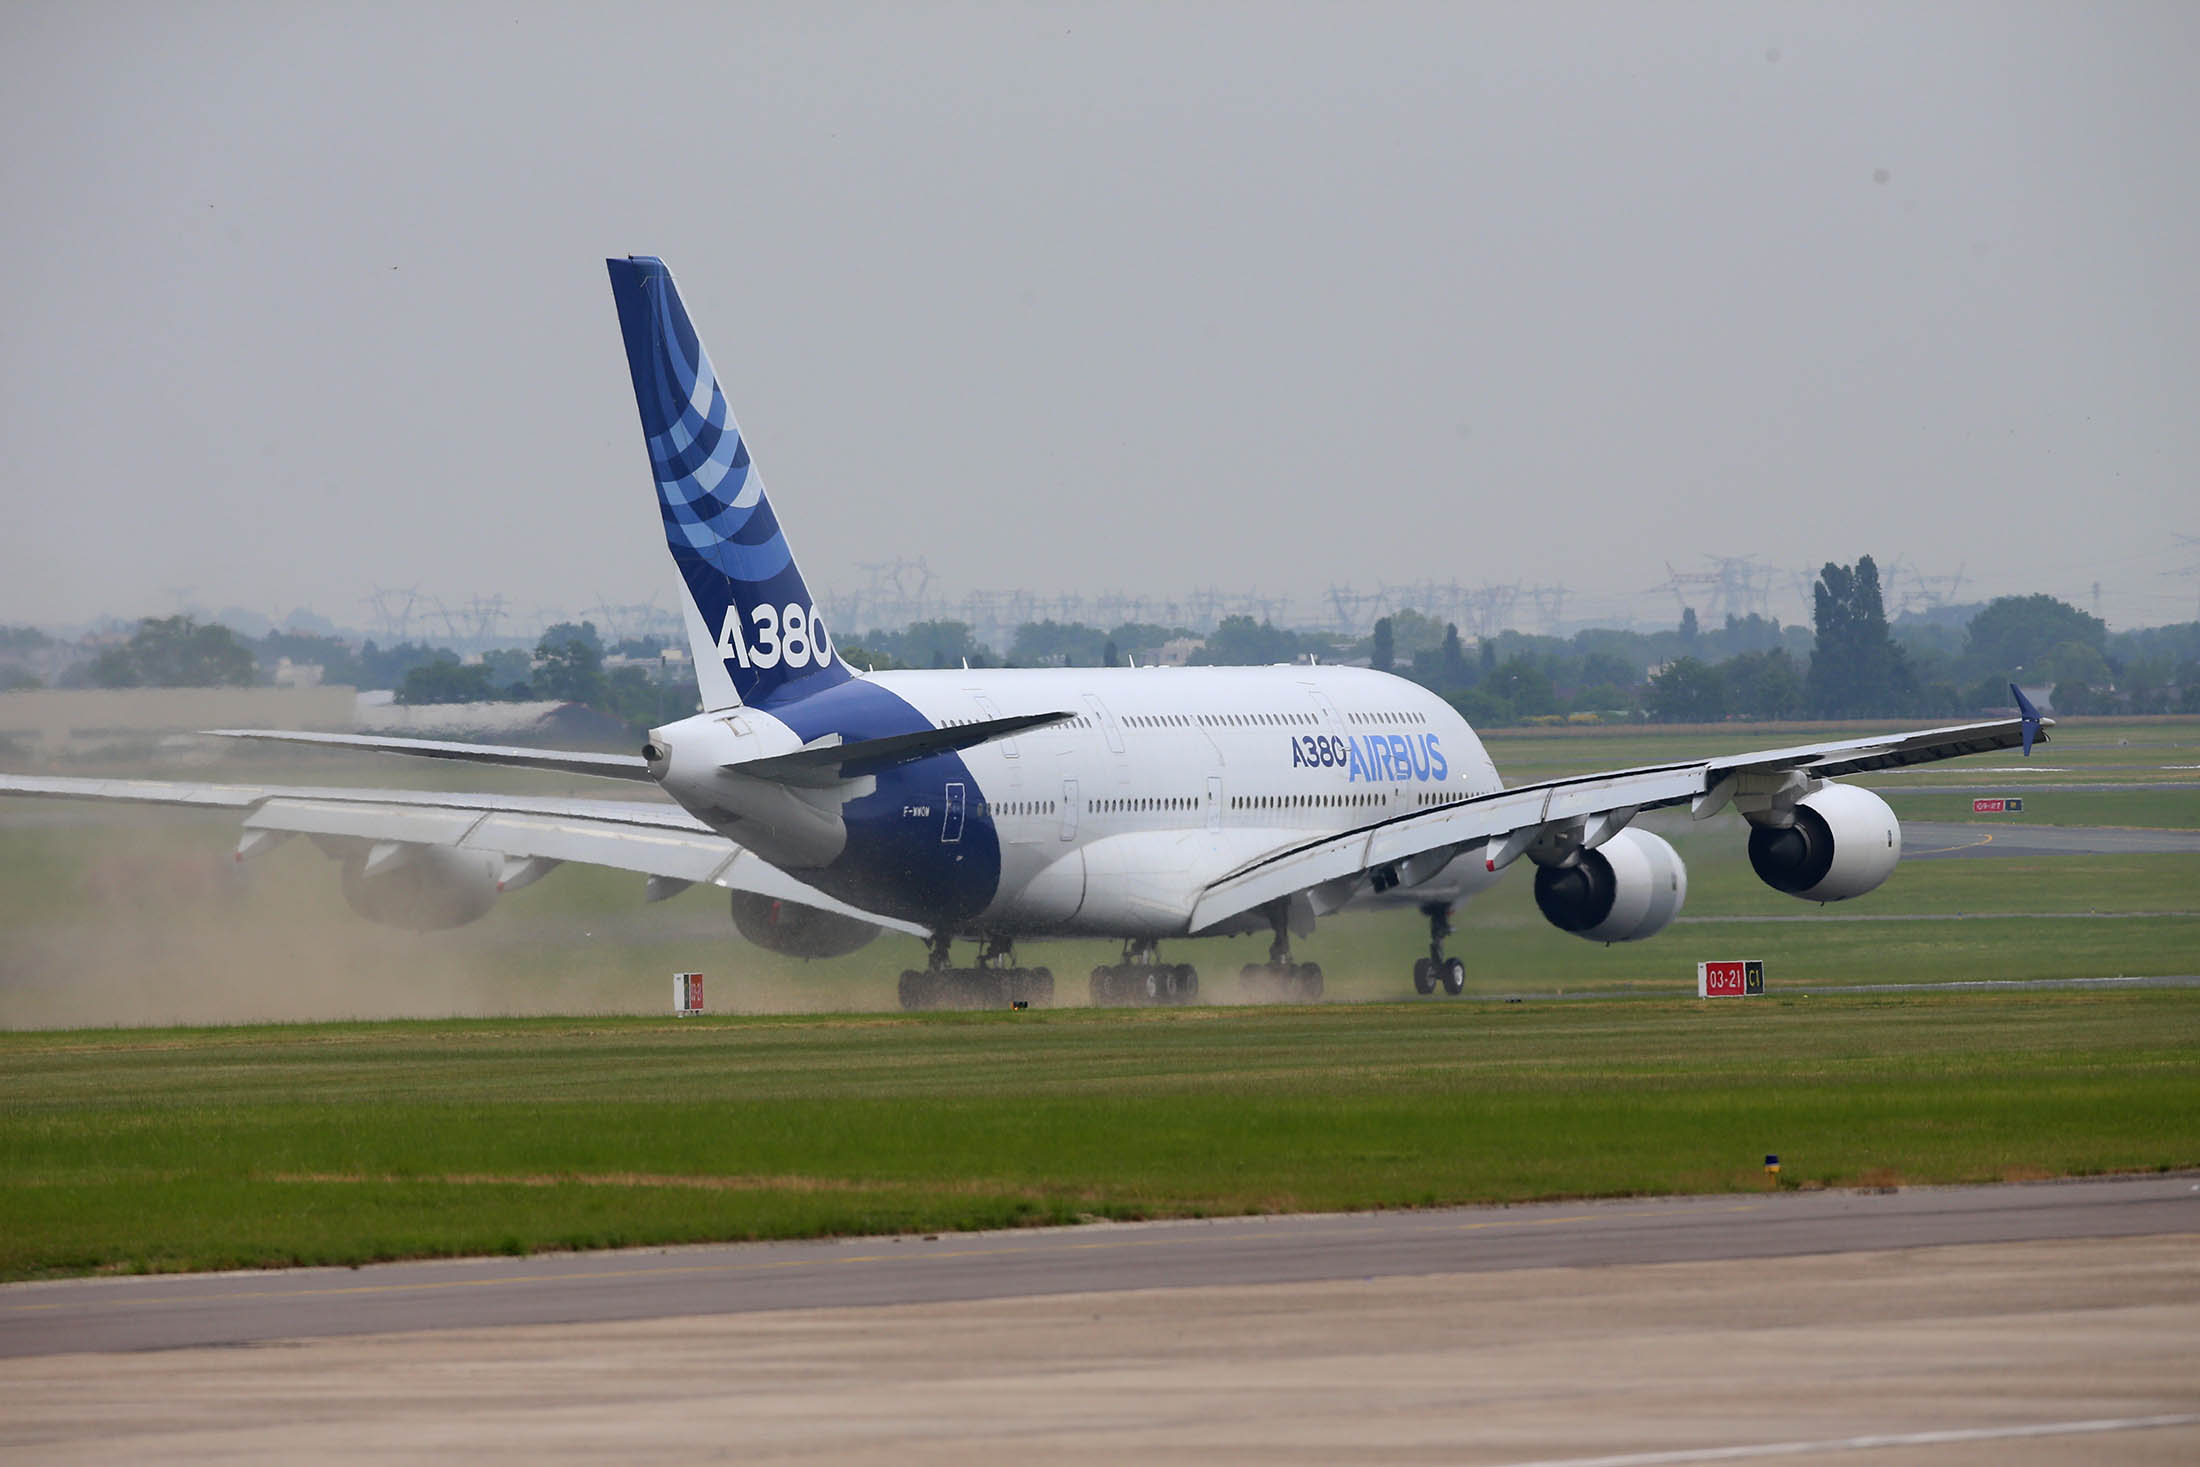 An Airbus SAS A380 aircraft lands after performing a flying display on the opening day of the 51st International Paris Air Show in Paris, France, on Monday, June 15, 2015. The 51st International Paris Air Show is the world's largest aviation and space industry exhibition and takes place at Le Bourget airport June 15 - 21.
